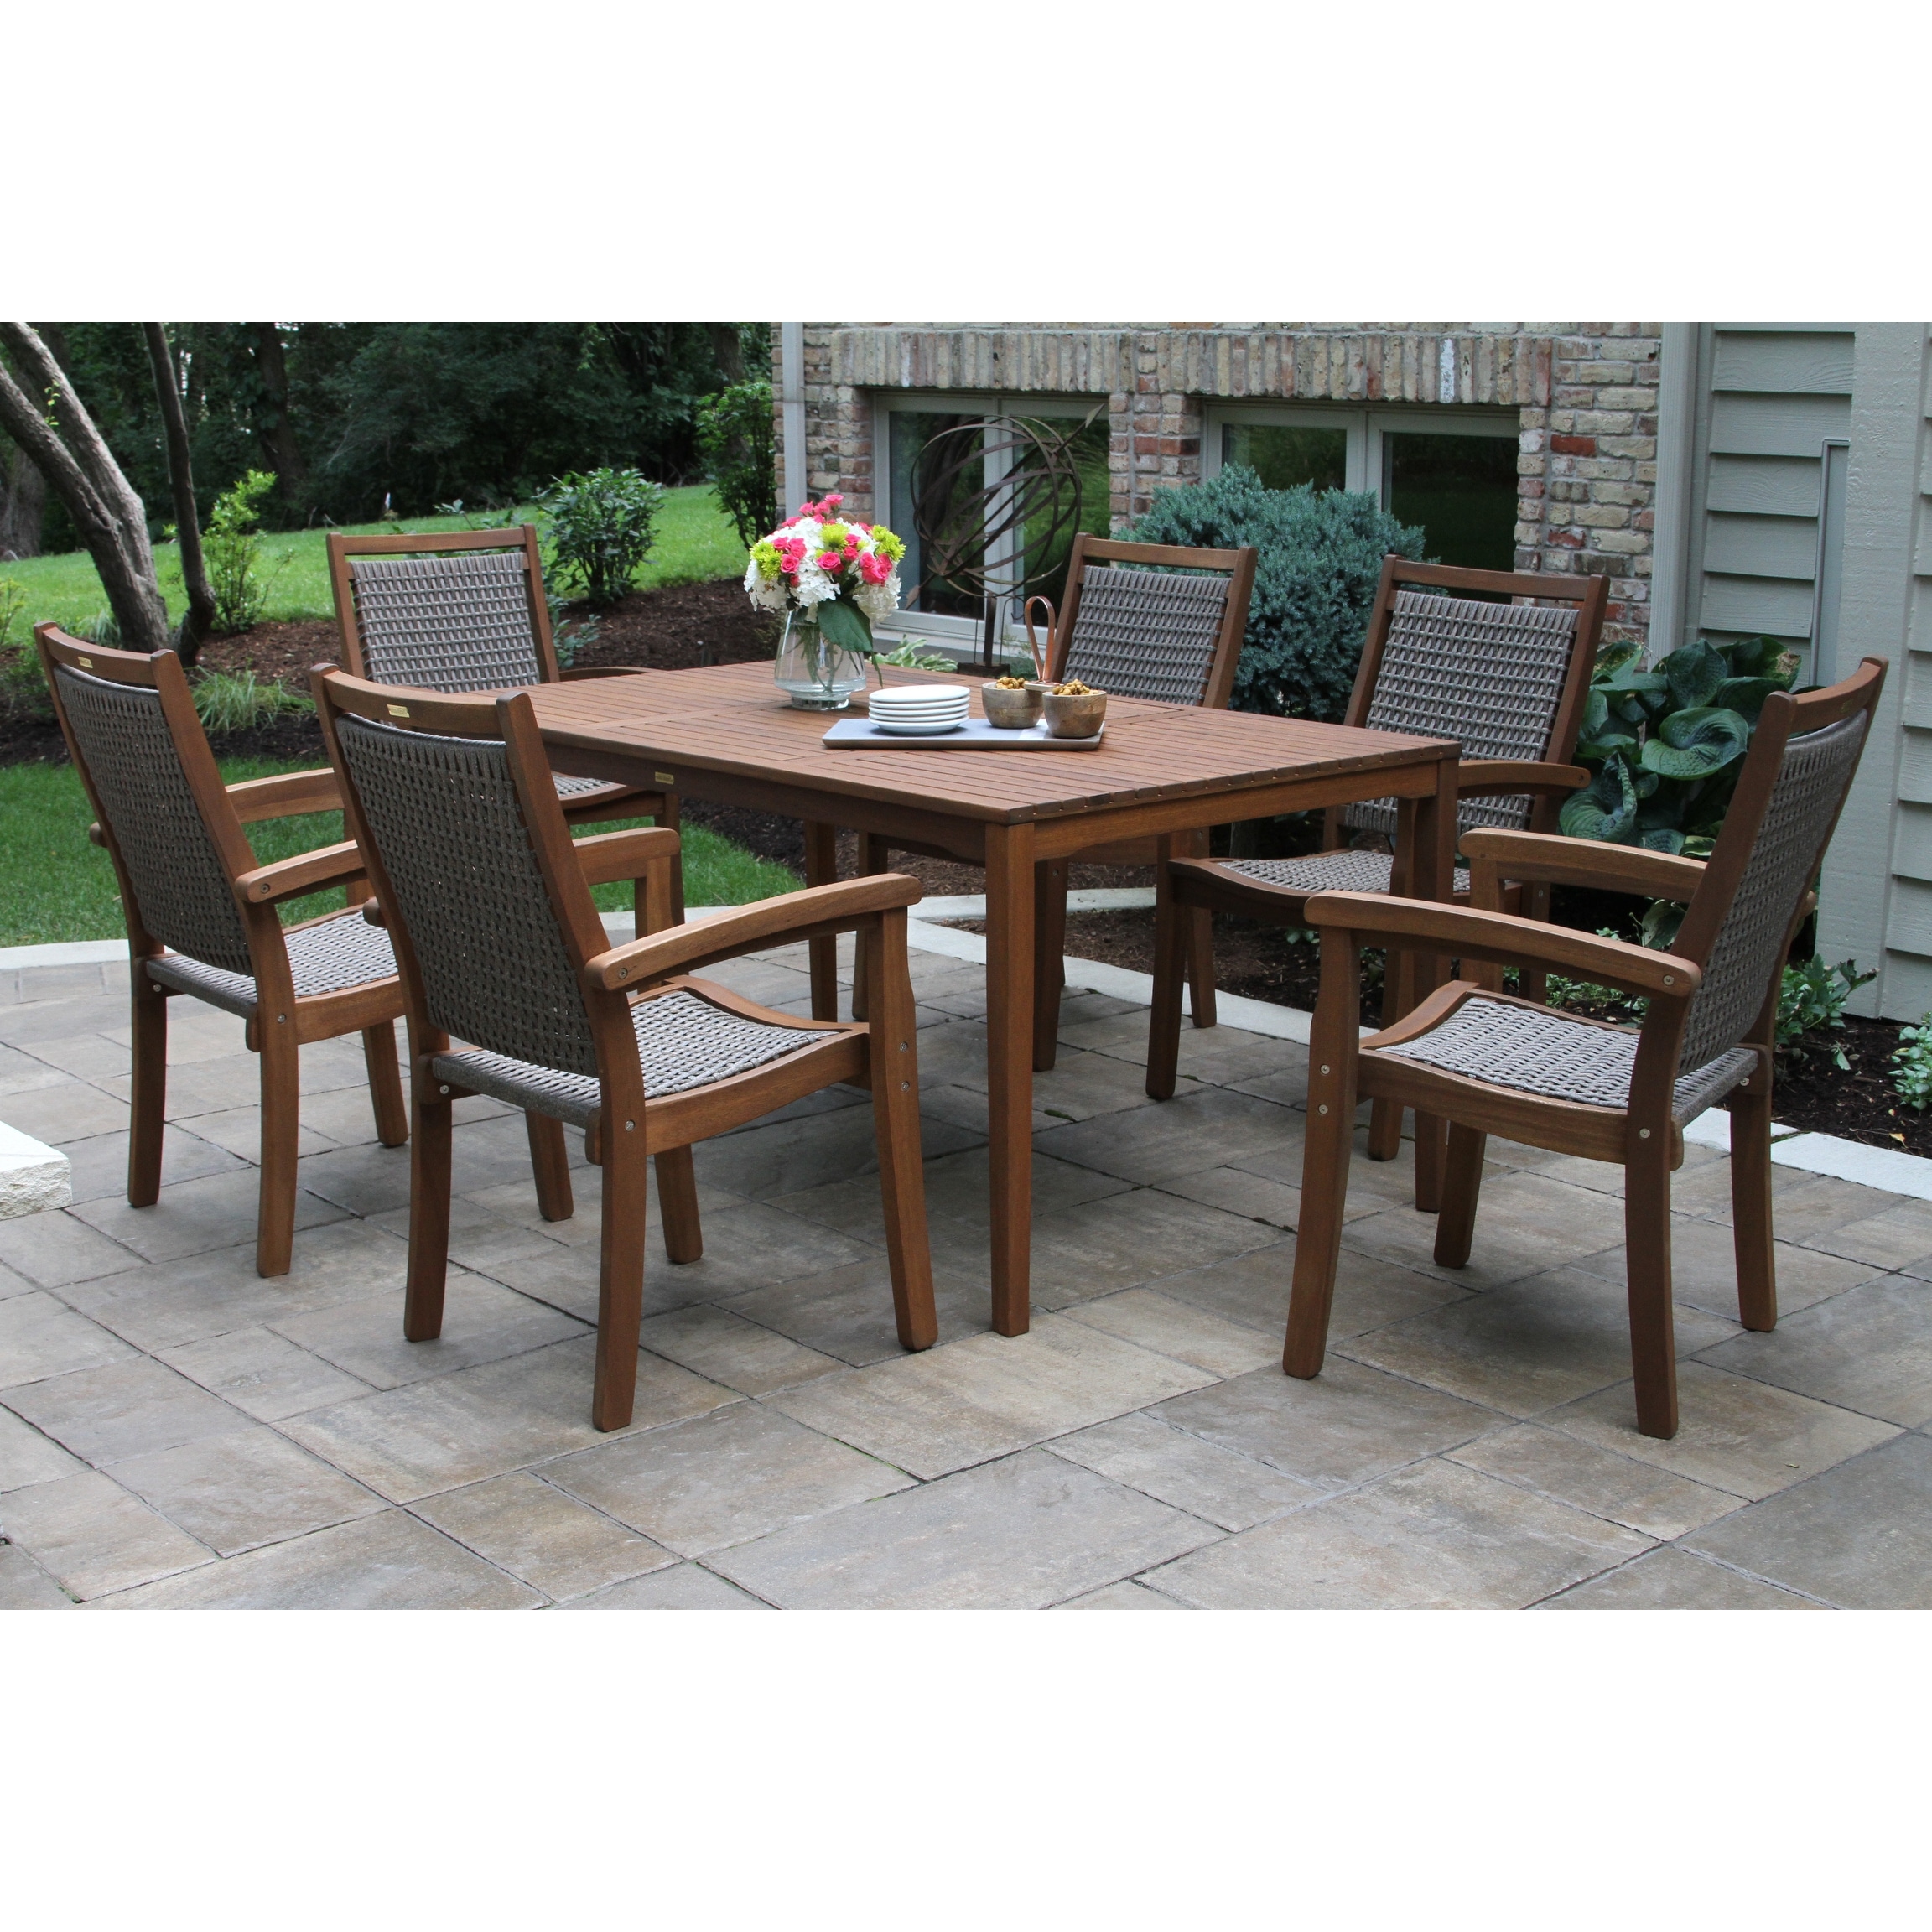 Eilaf 7 Pc. Eucalyptus And Wicker Dining Set